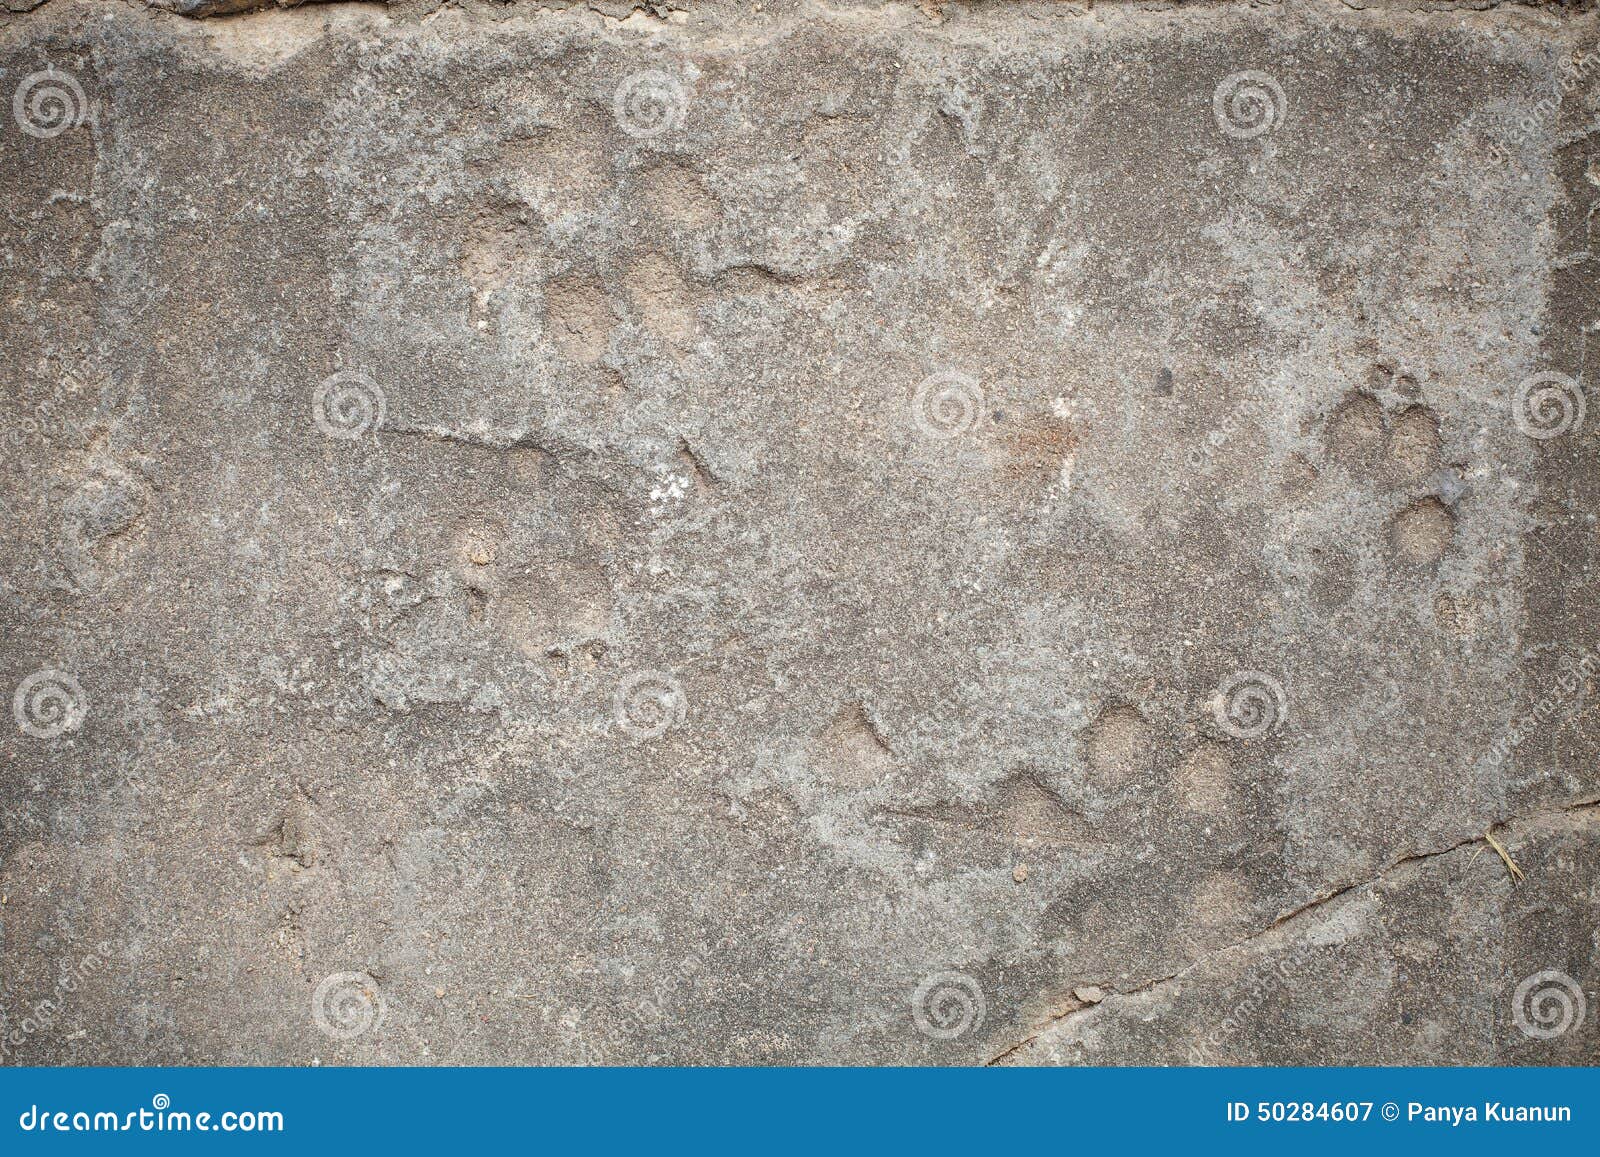 Background, Dog Footprint on Concrete Stock Image - Image of tame